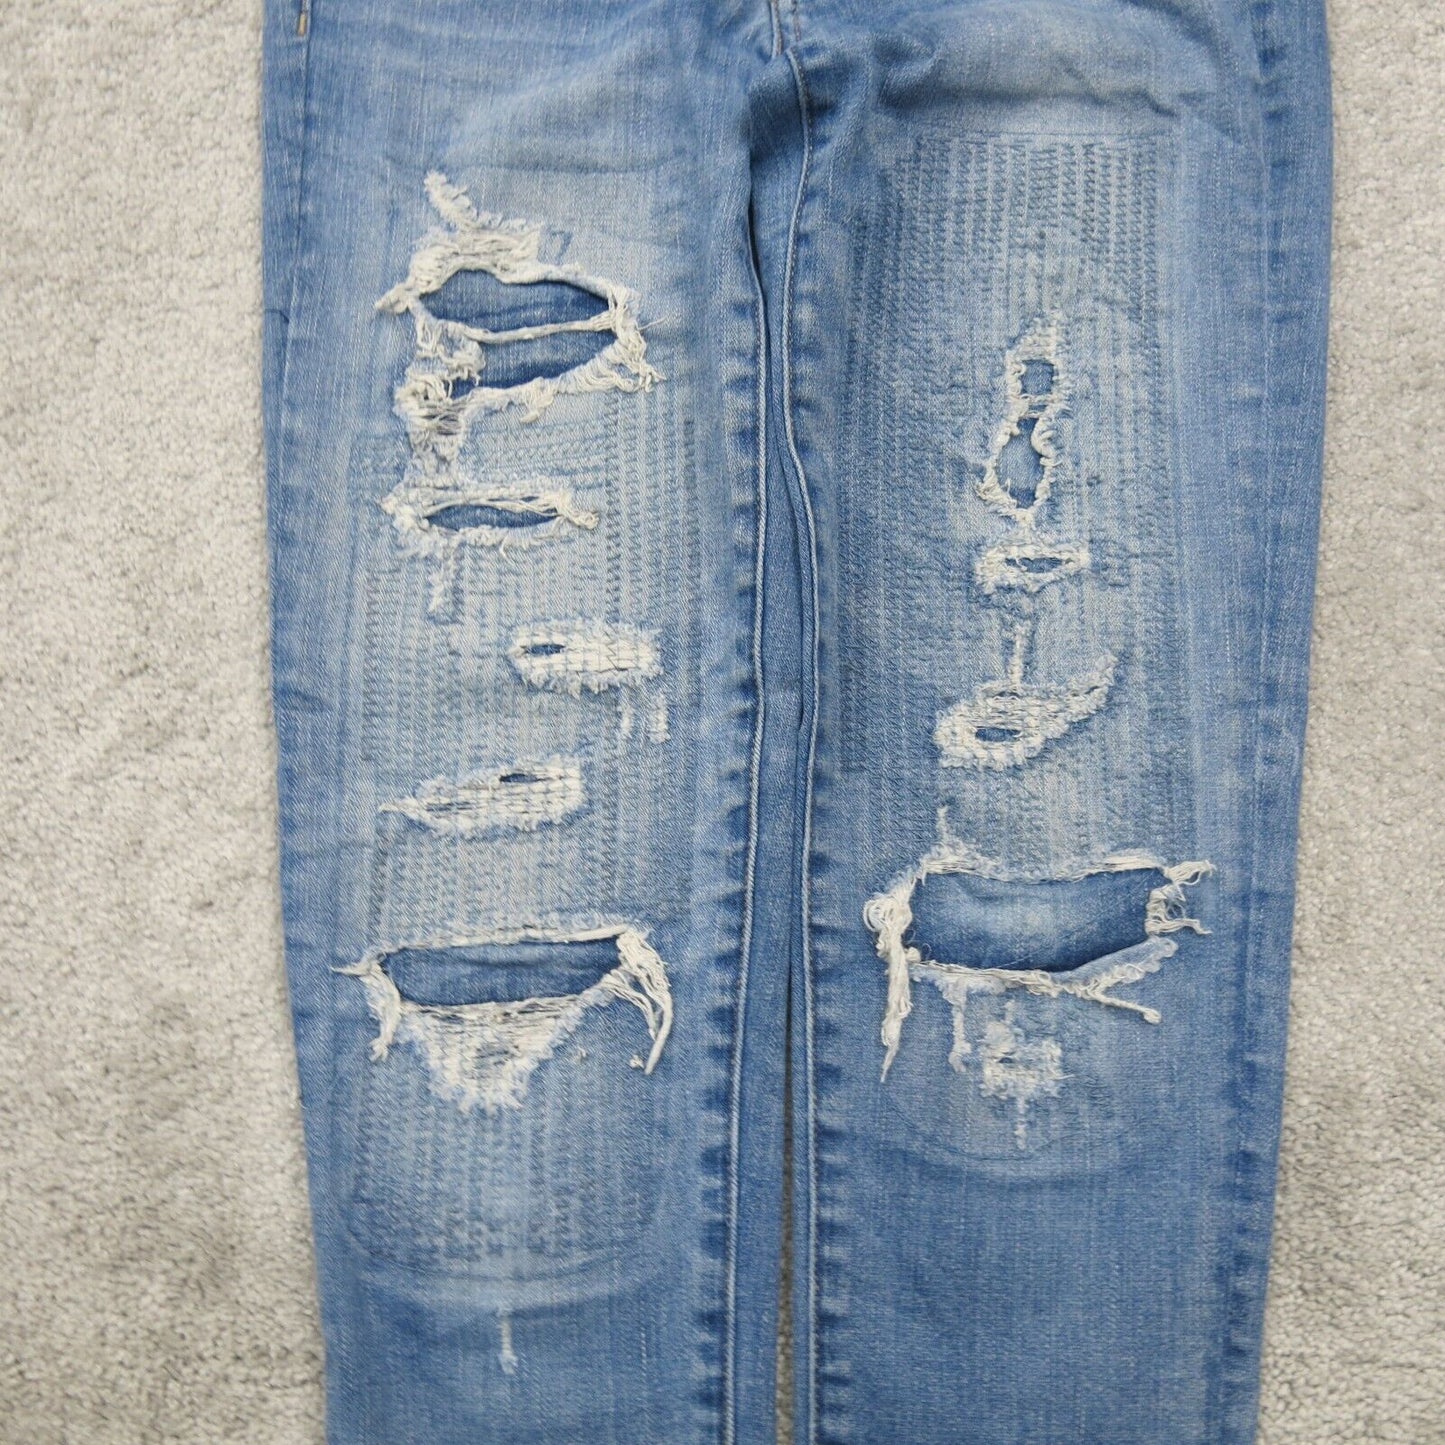 American Eagle Womens Jegging Jeans Distressed Super Stretch Mid Rise Blue 4 Reg